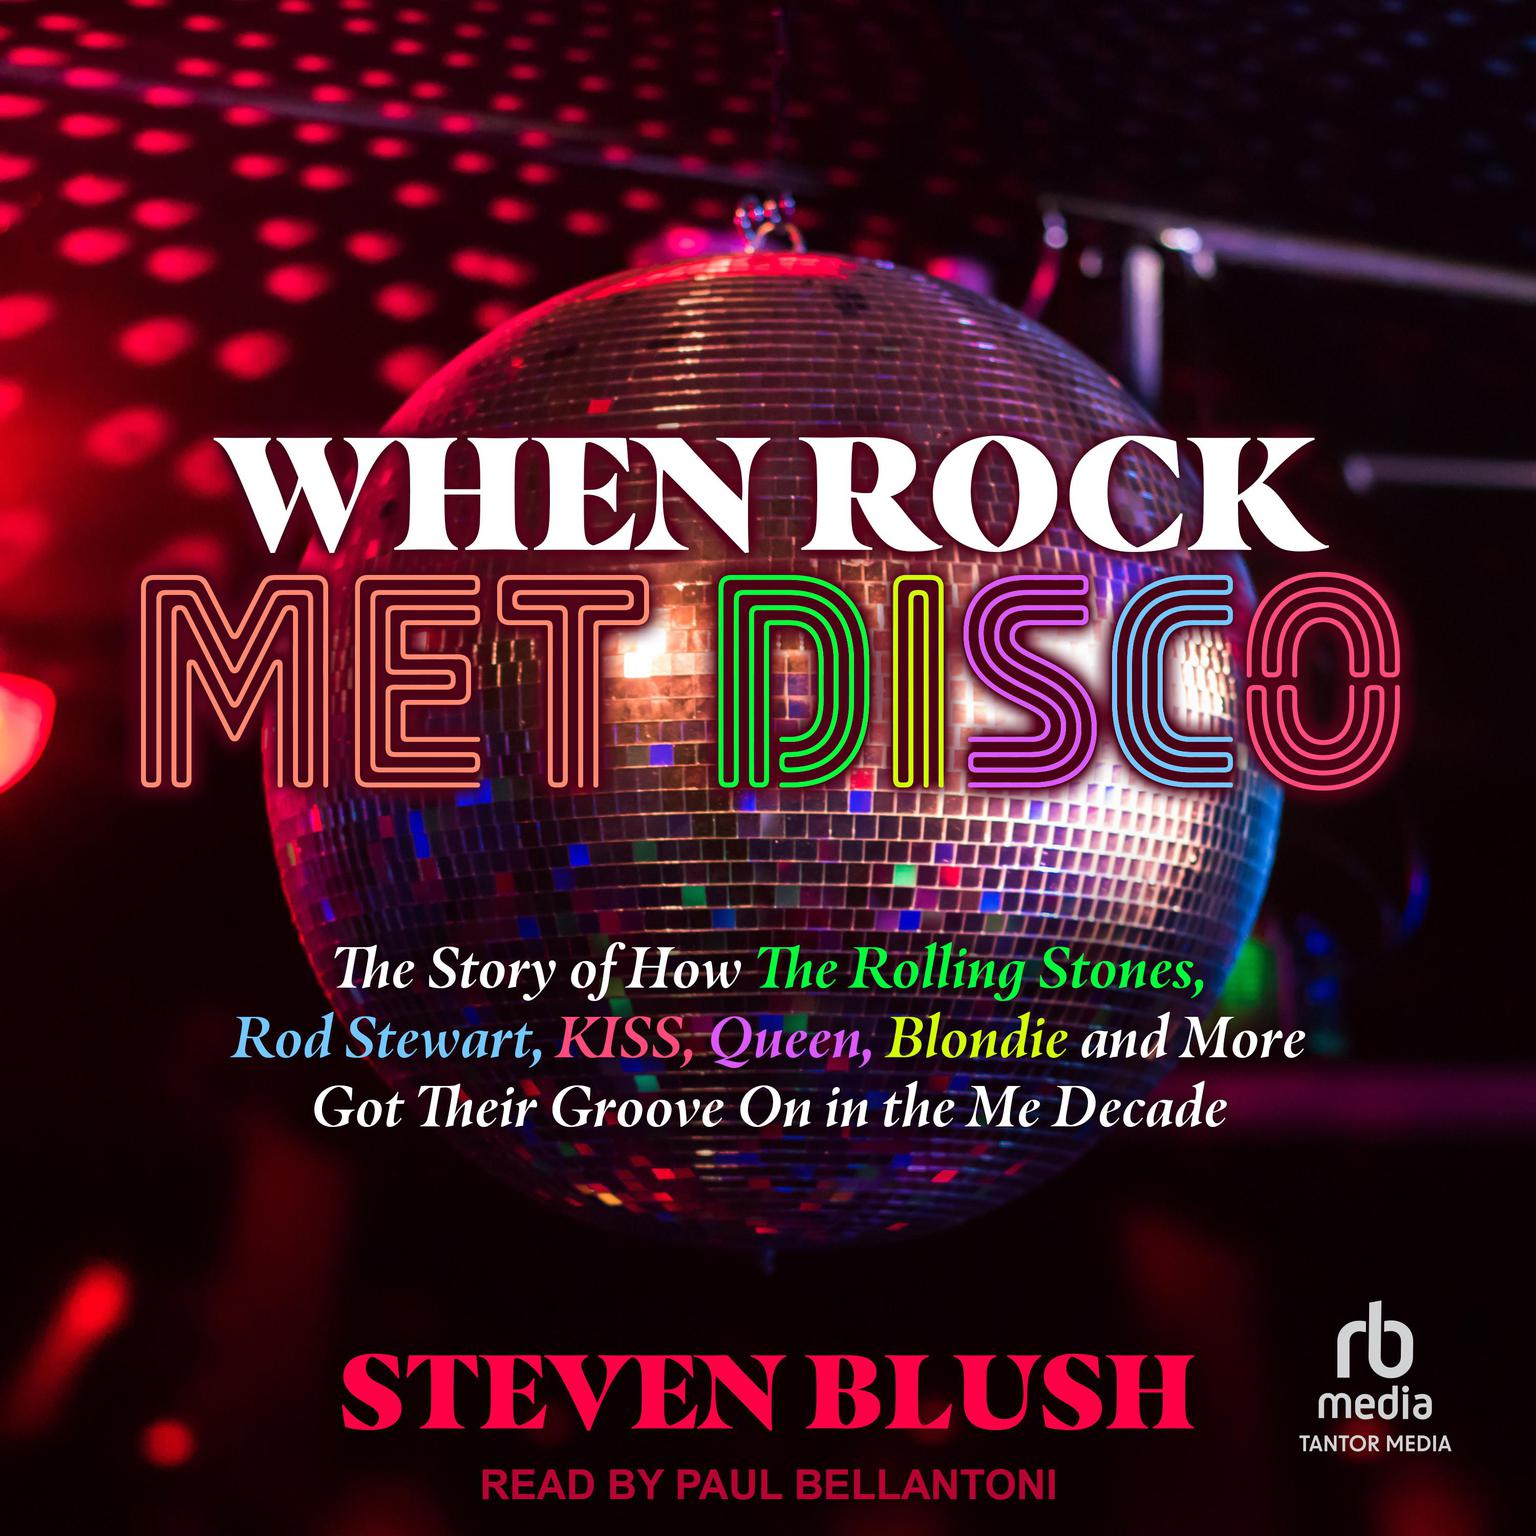 When Rock Met Disco: The Story of How The Rolling Stones, Rod Stewart, KISS, Queen, Blondie and More Got Their Groove On in the Me Decade Audiobook, by Steven Blush